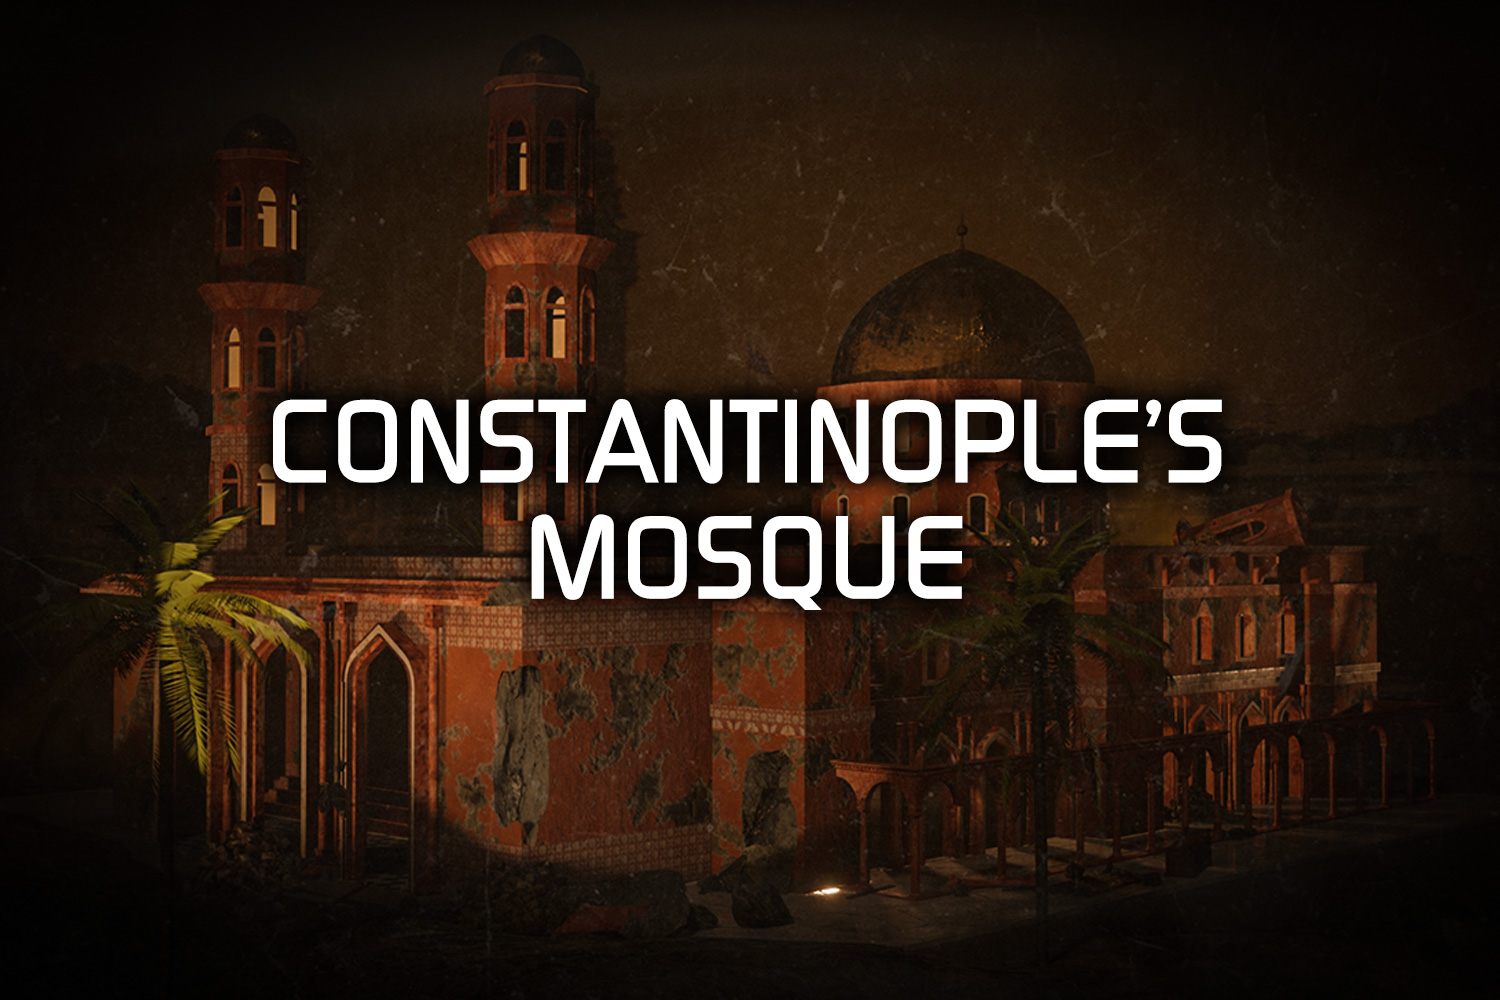 CONSTANTINOPLE’S MOSQUE